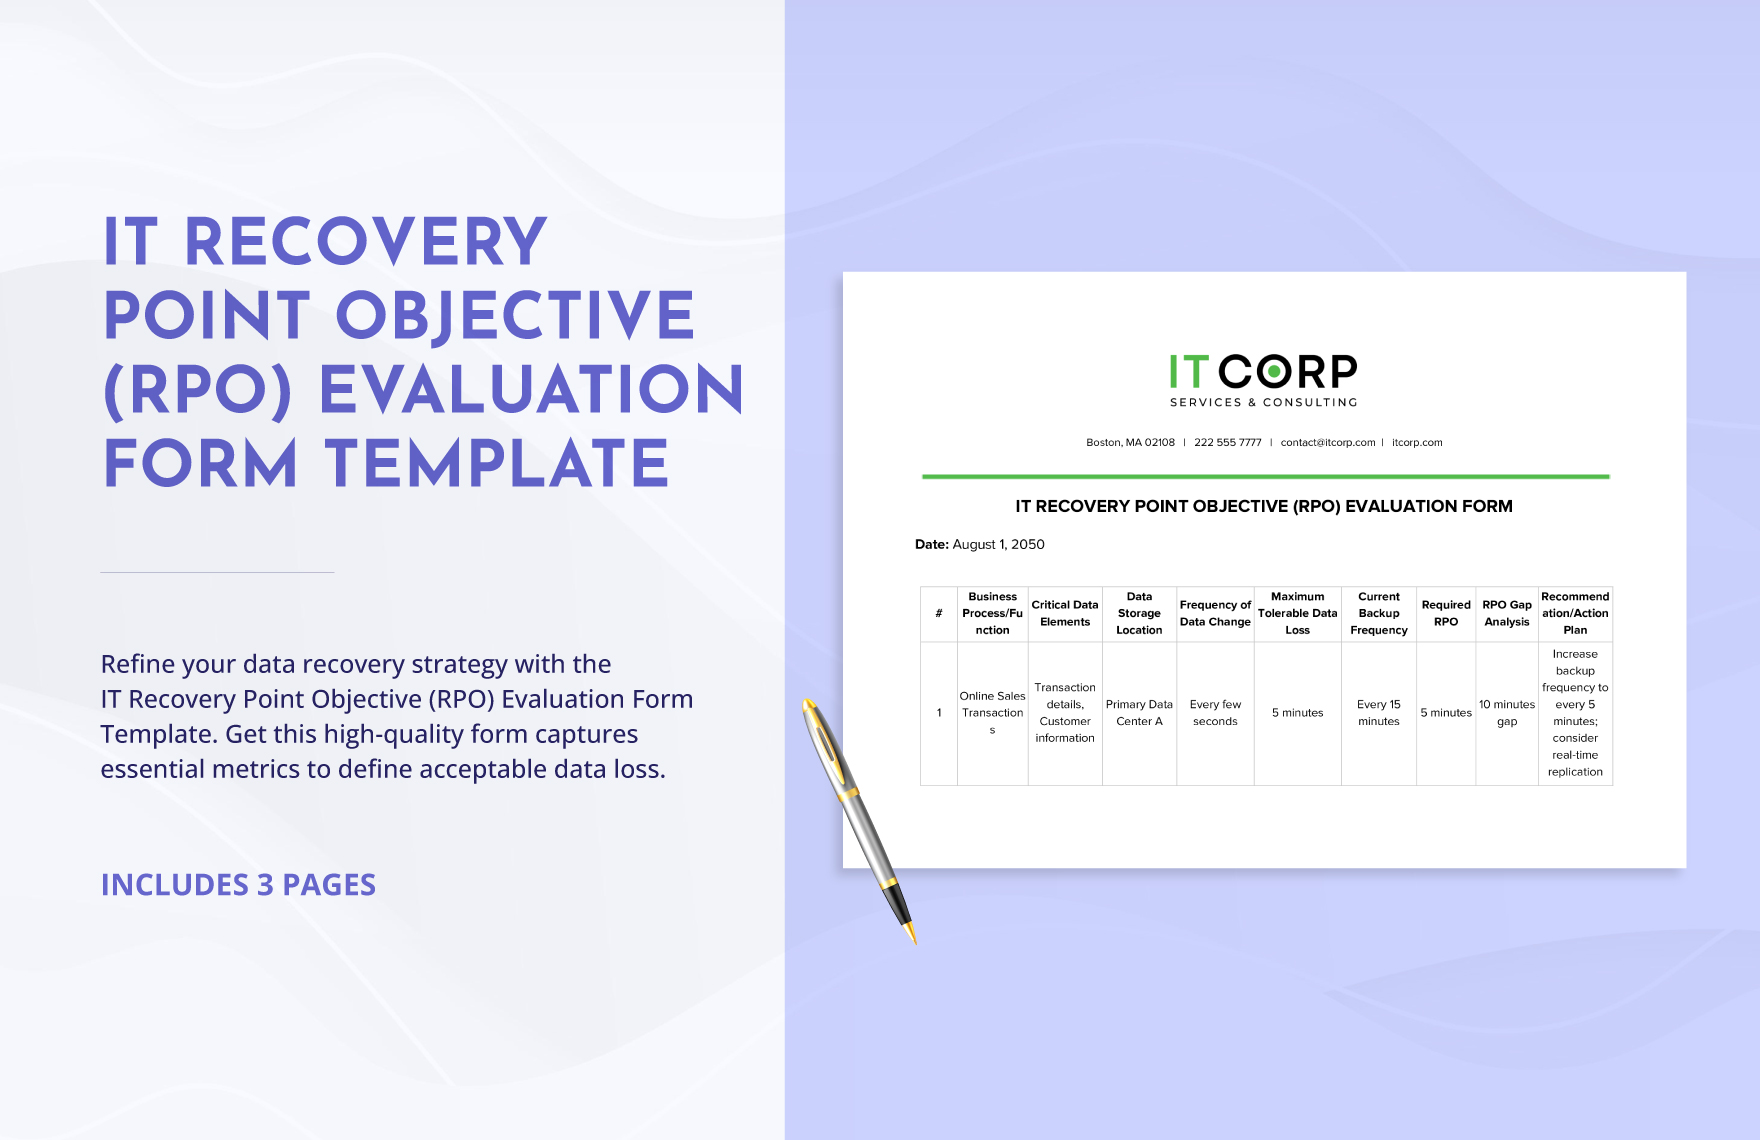 IT Recovery Point Objective (RPO) Evaluation Form Template